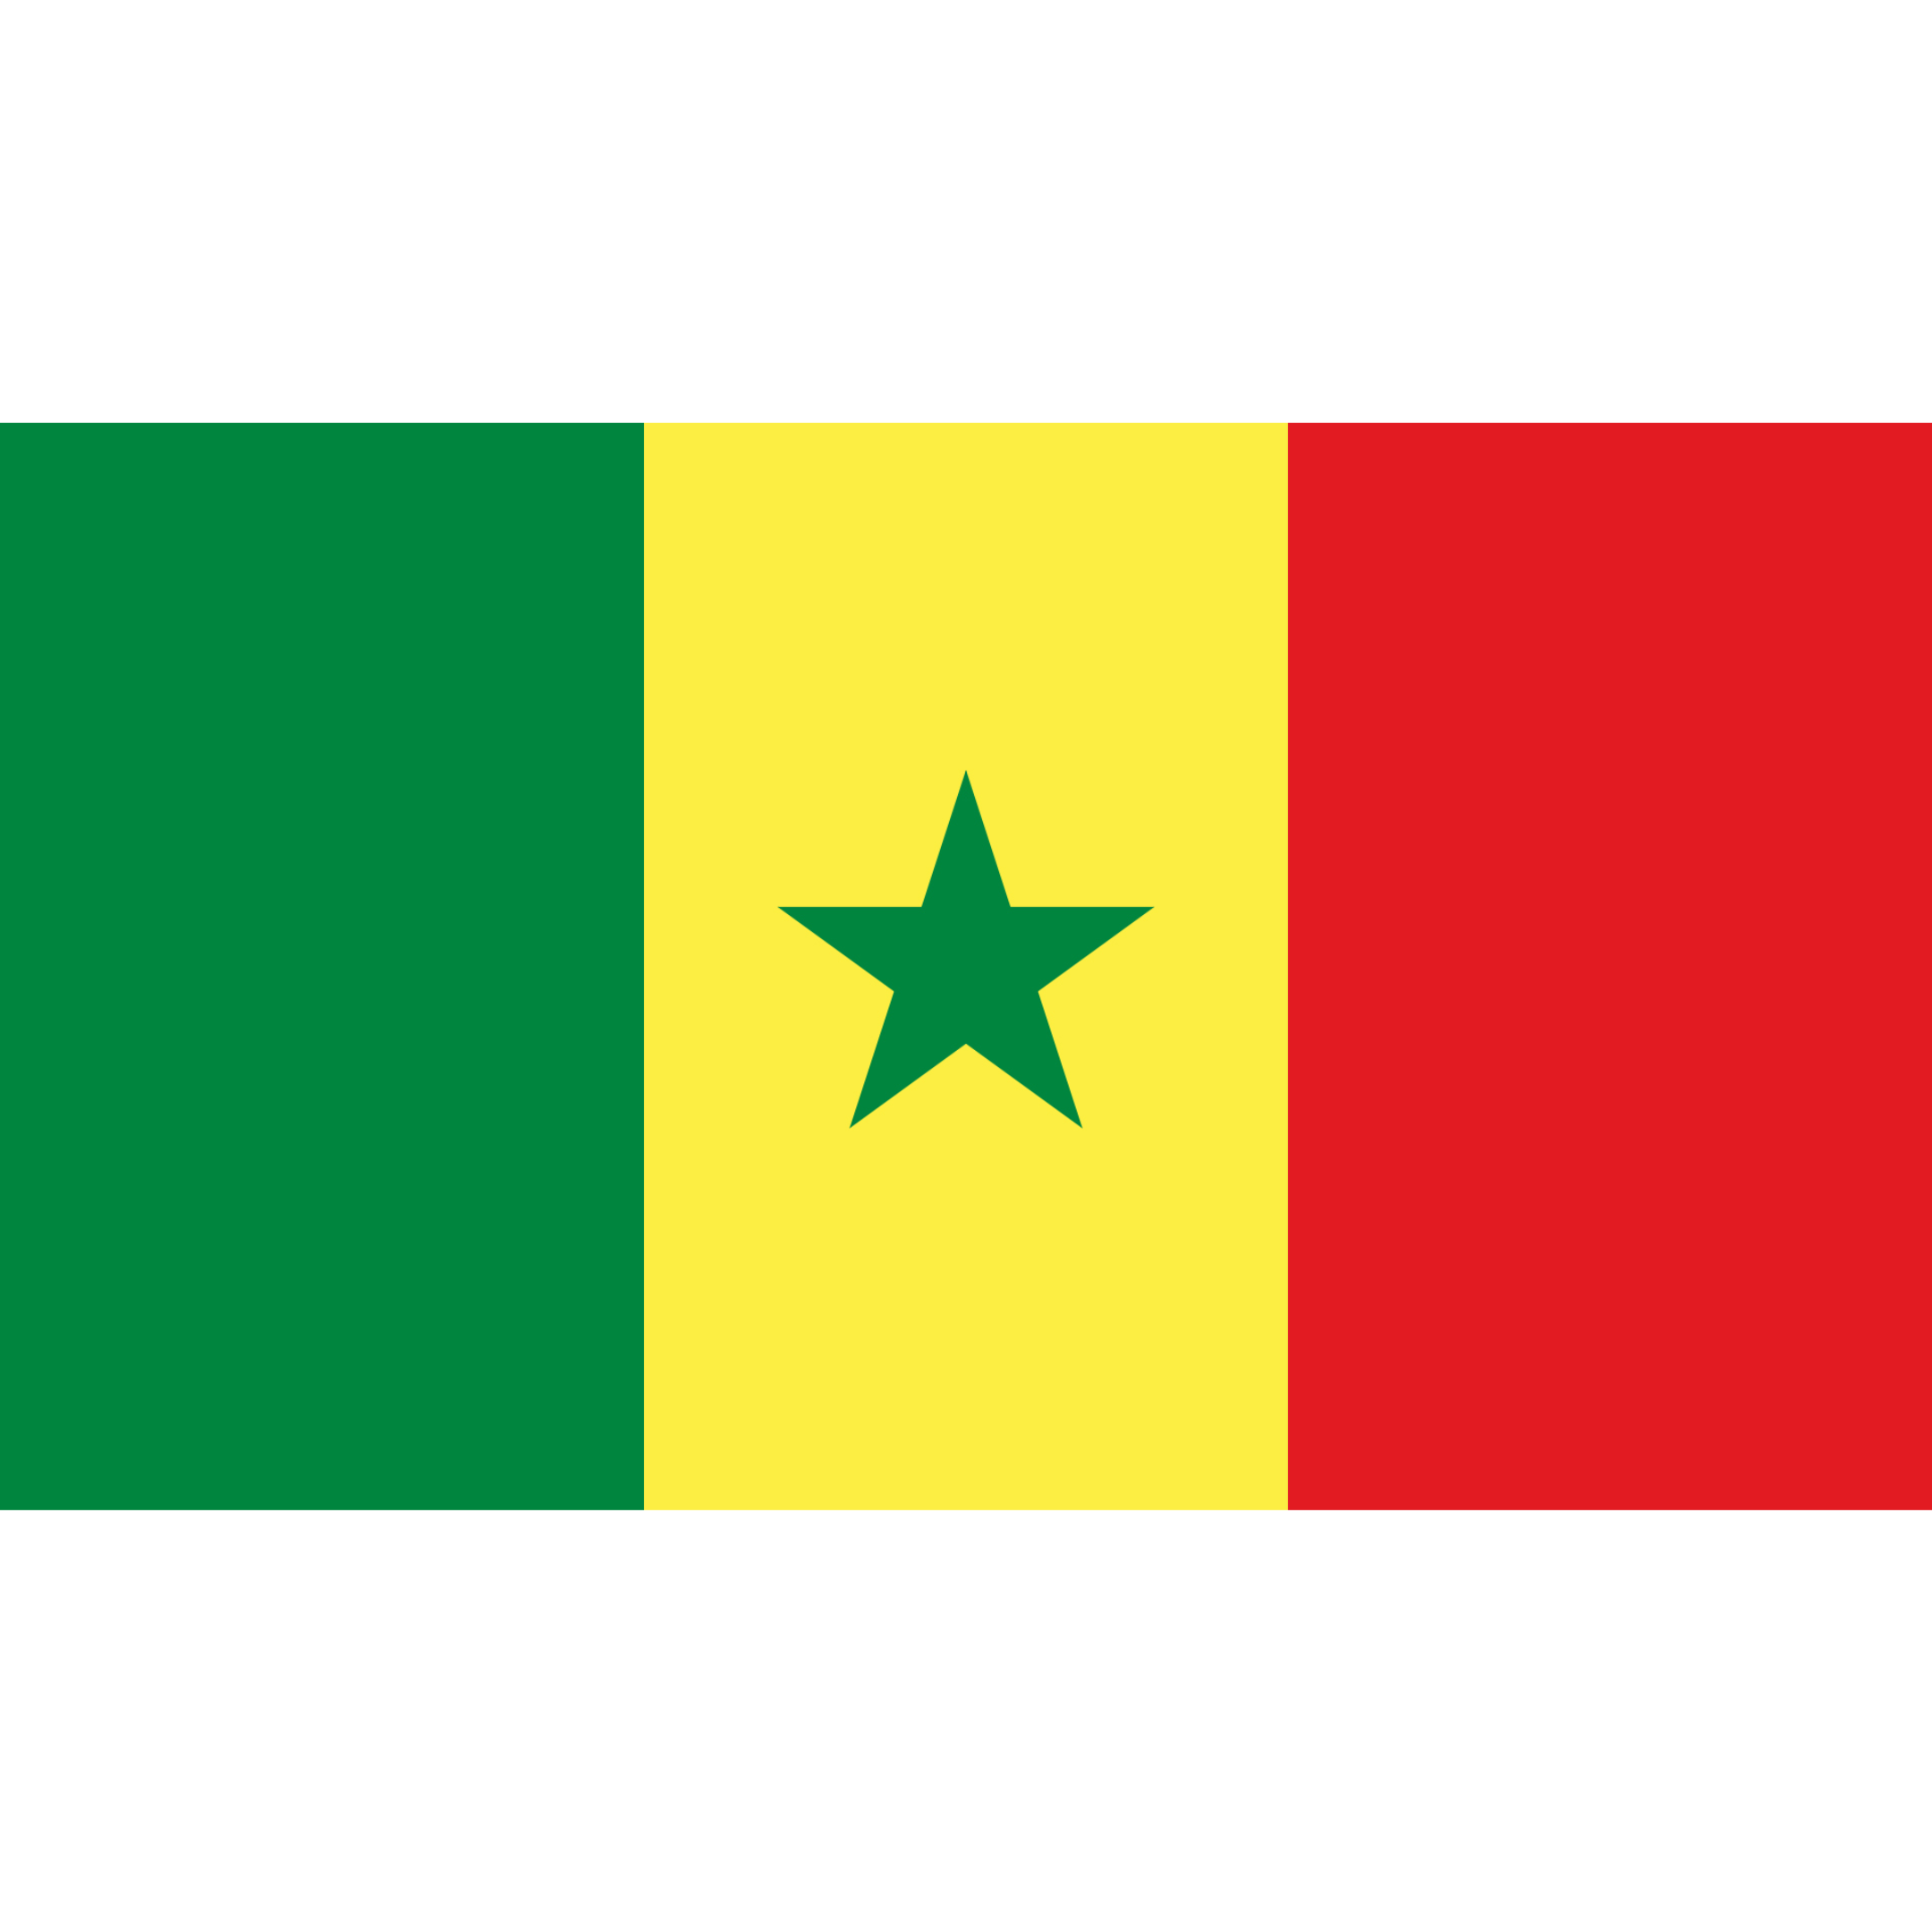 The flag of Senegal has three vertical green, yellow and red bands with a green five-pointed star in the middle band. 